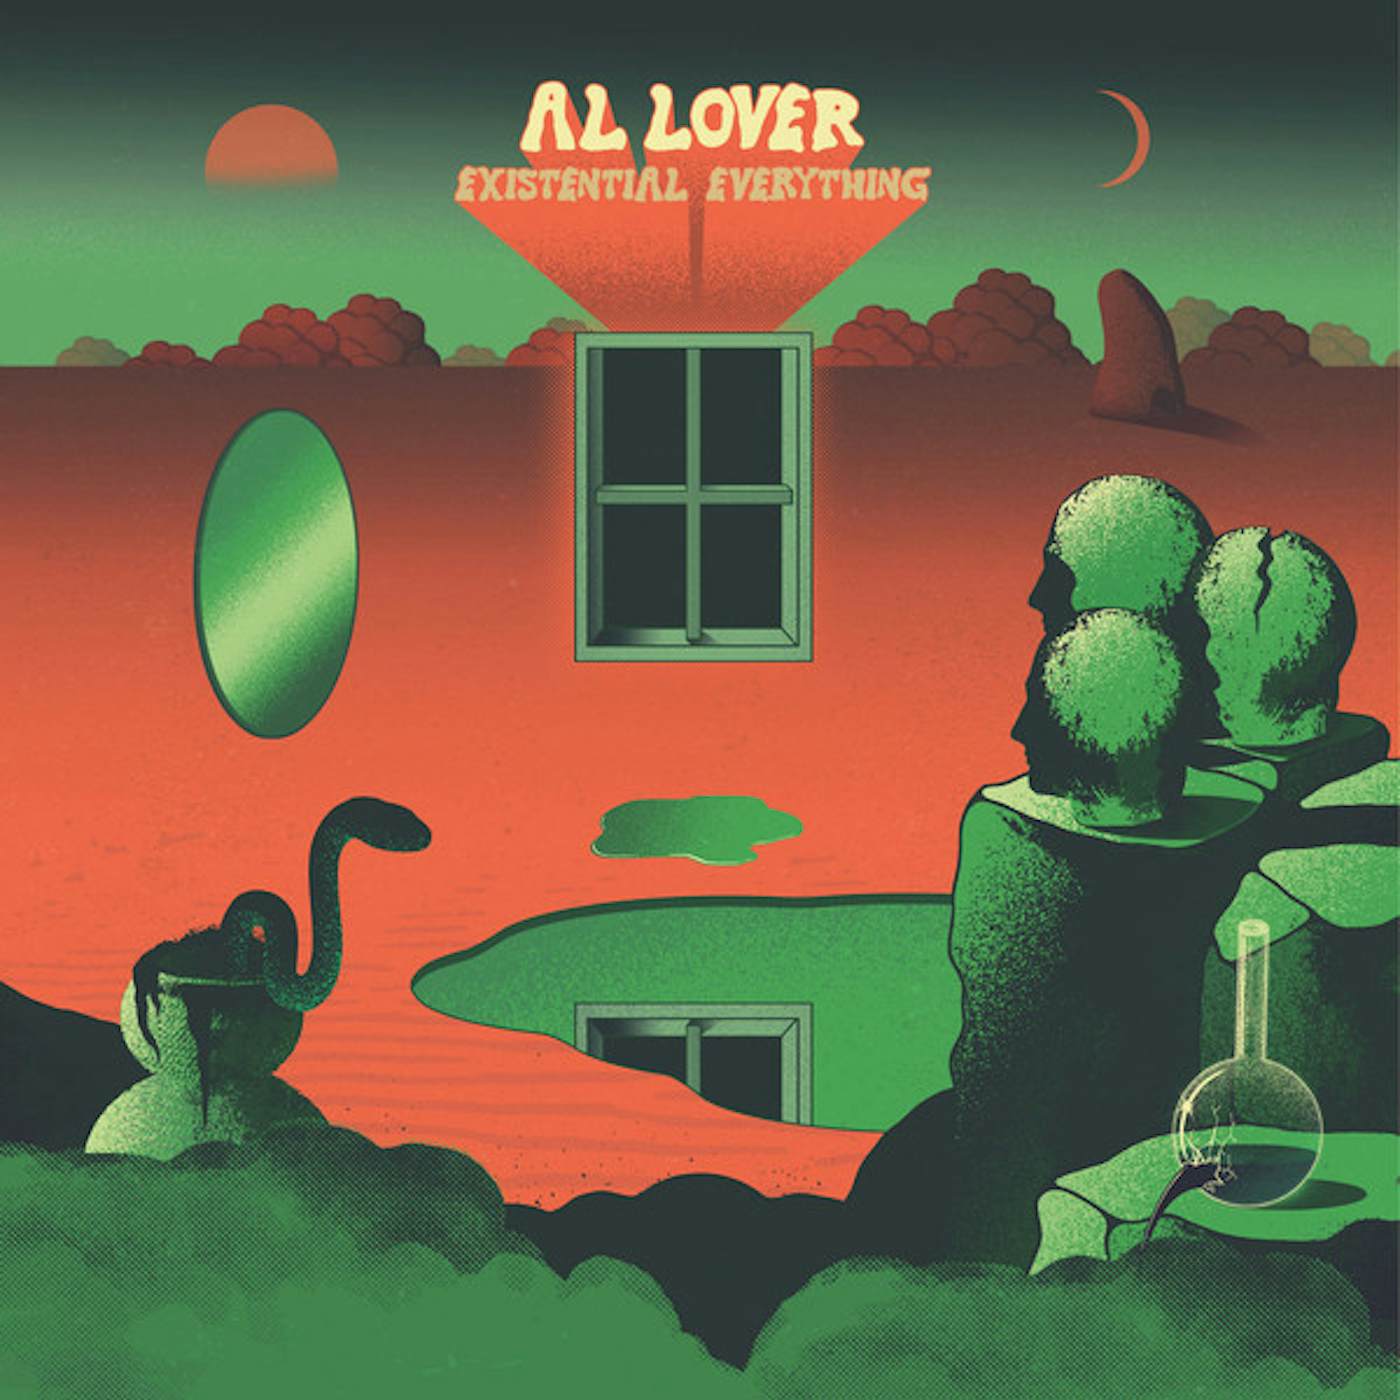 Al Lover Existential Everything Vinyl Record